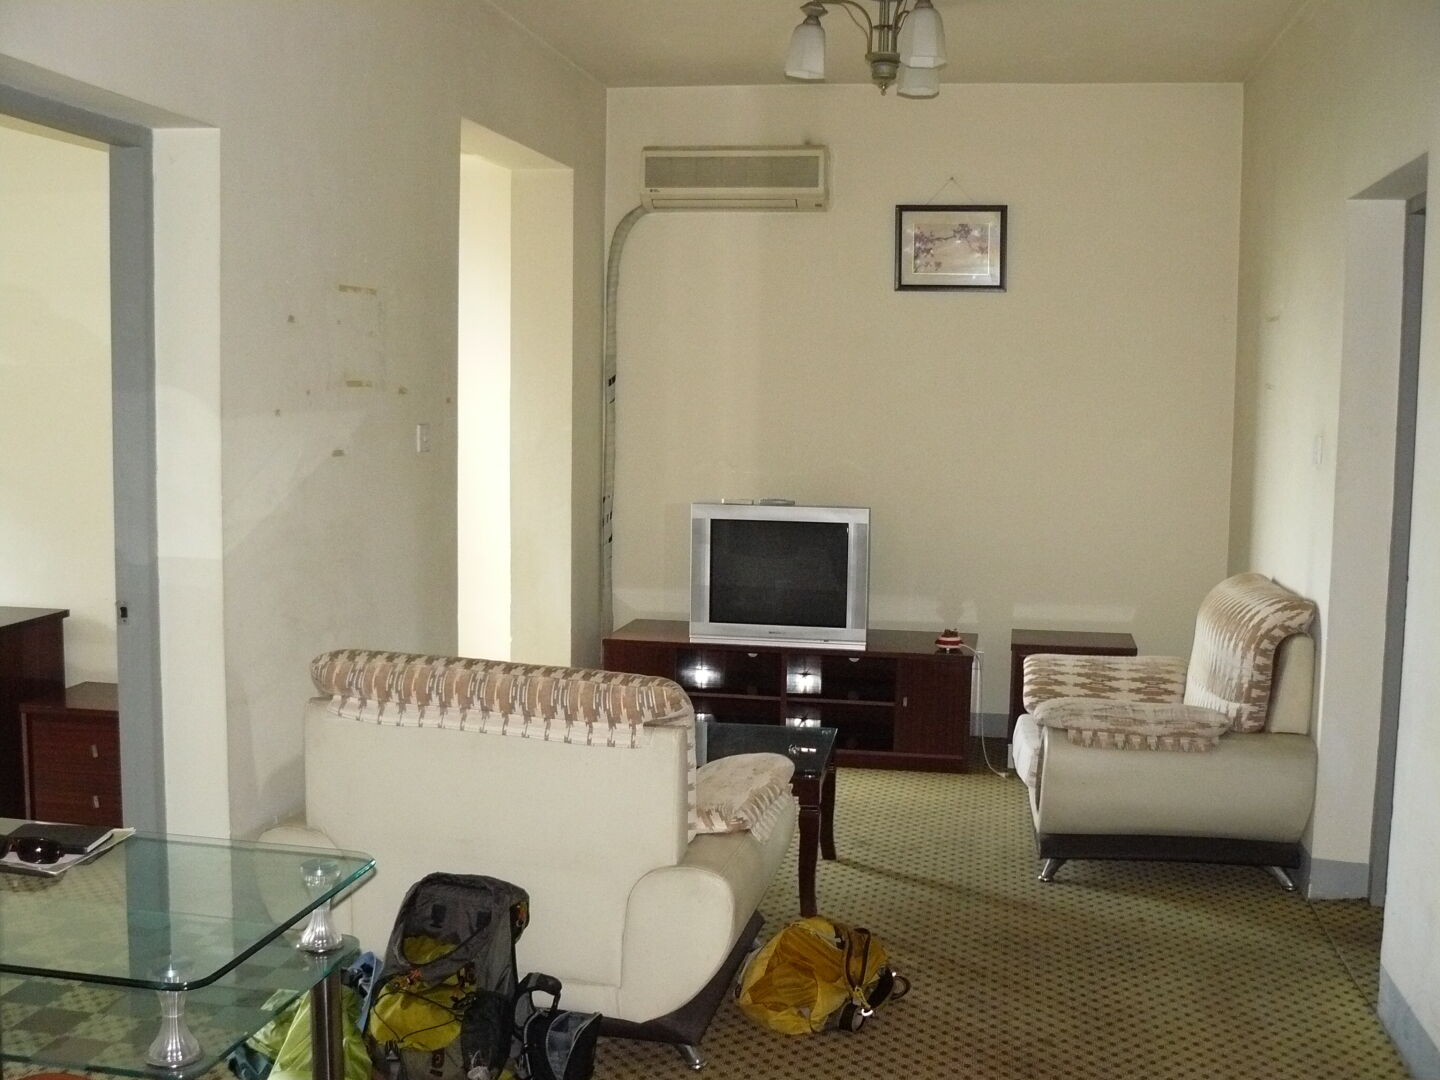 This is my living room, with the door to the bedroom on the right. The kitchen door is not visible, would be to the left. In my back is the entrance. The bright opening on the left in the back leads to the living room window.